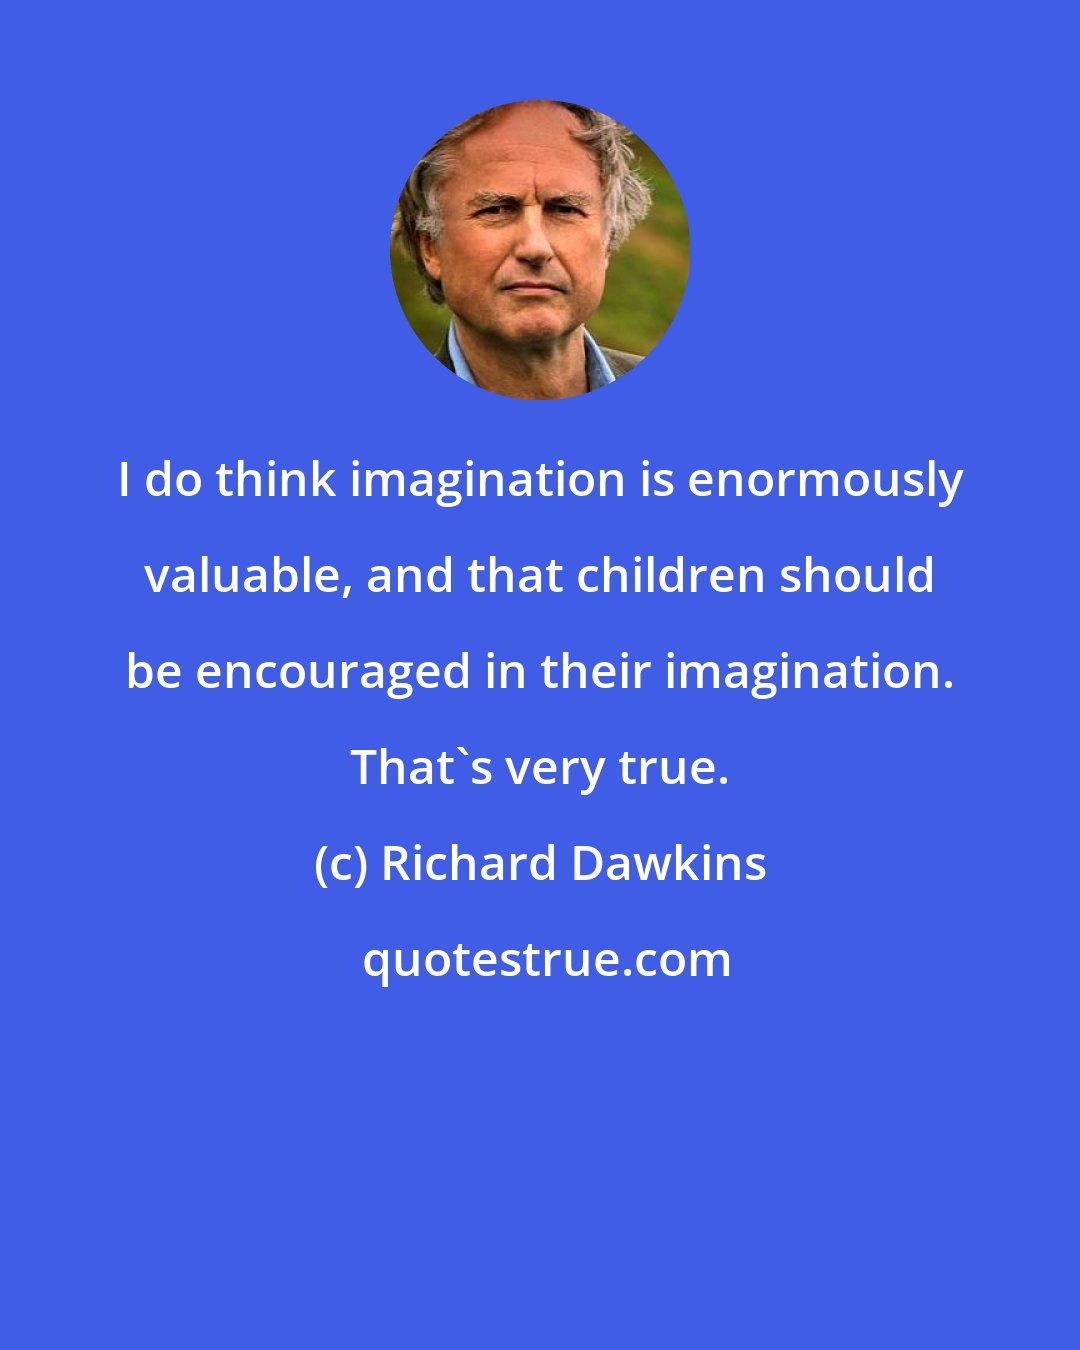 Richard Dawkins: I do think imagination is enormously valuable, and that children should be encouraged in their imagination. That's very true.